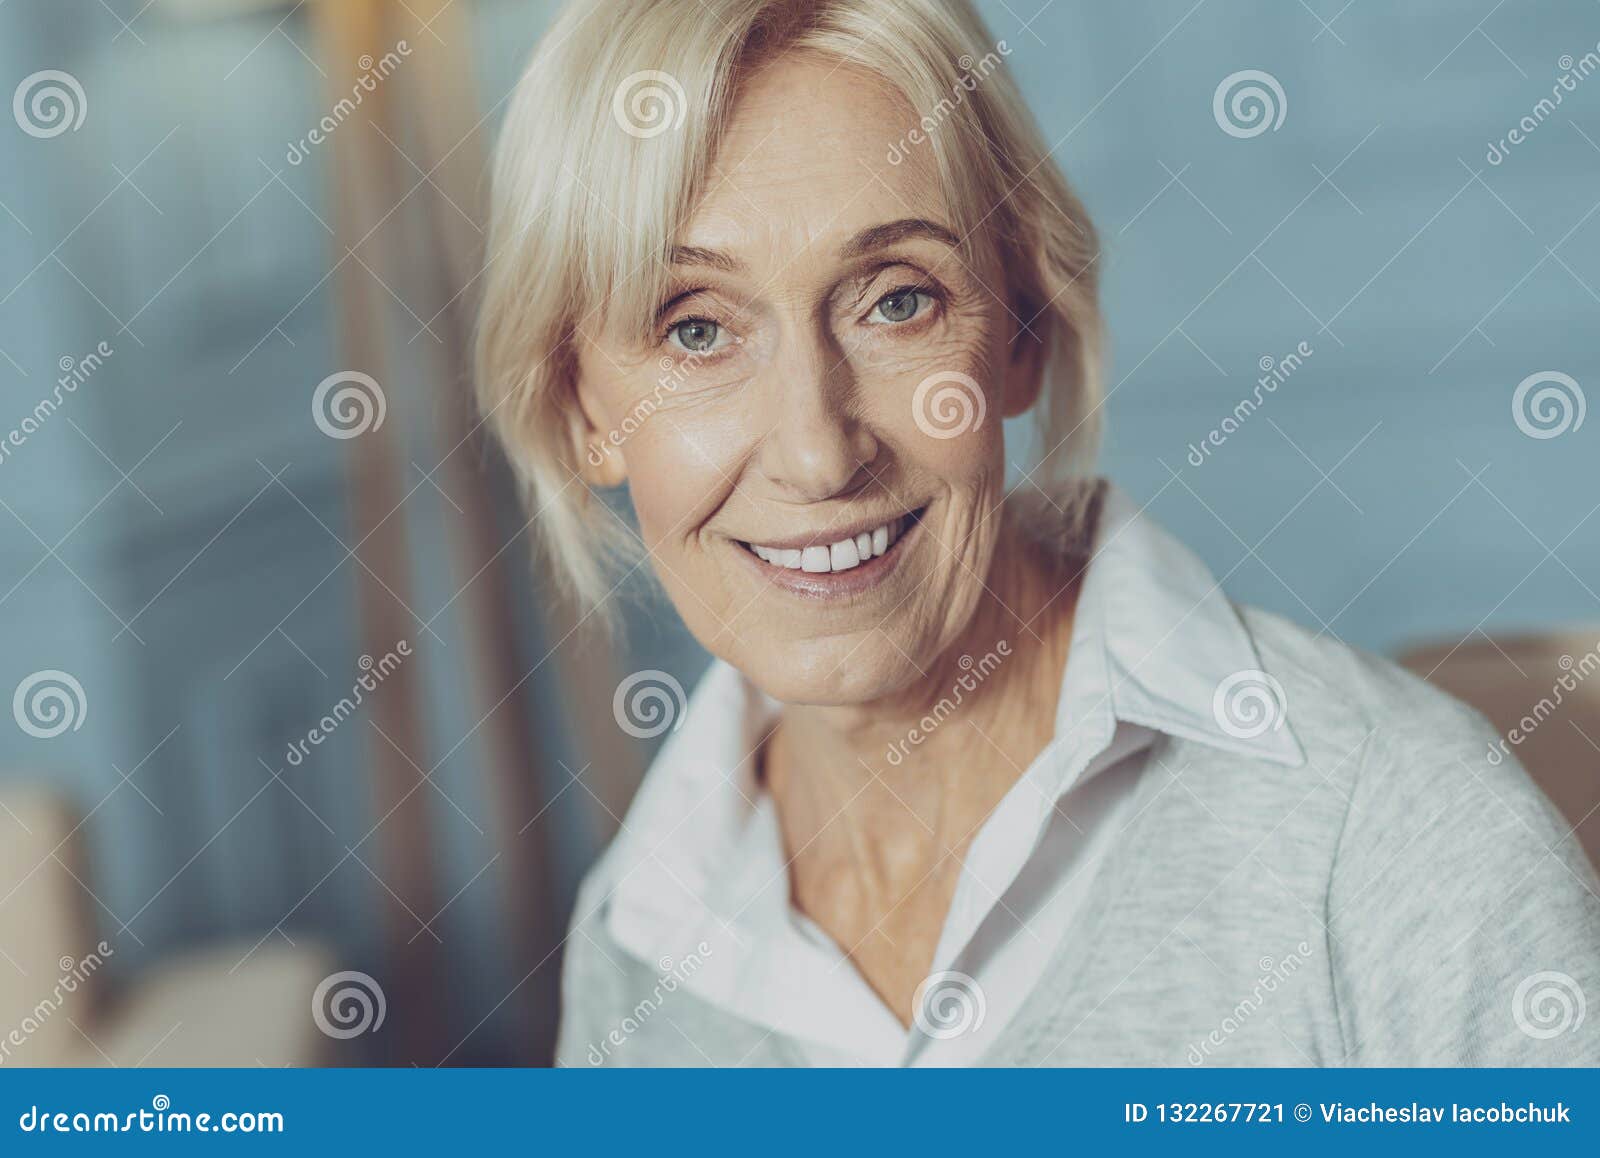 14 631 Granny Portrait Photos Free Royalty Free Stock Photos From Dreamstime